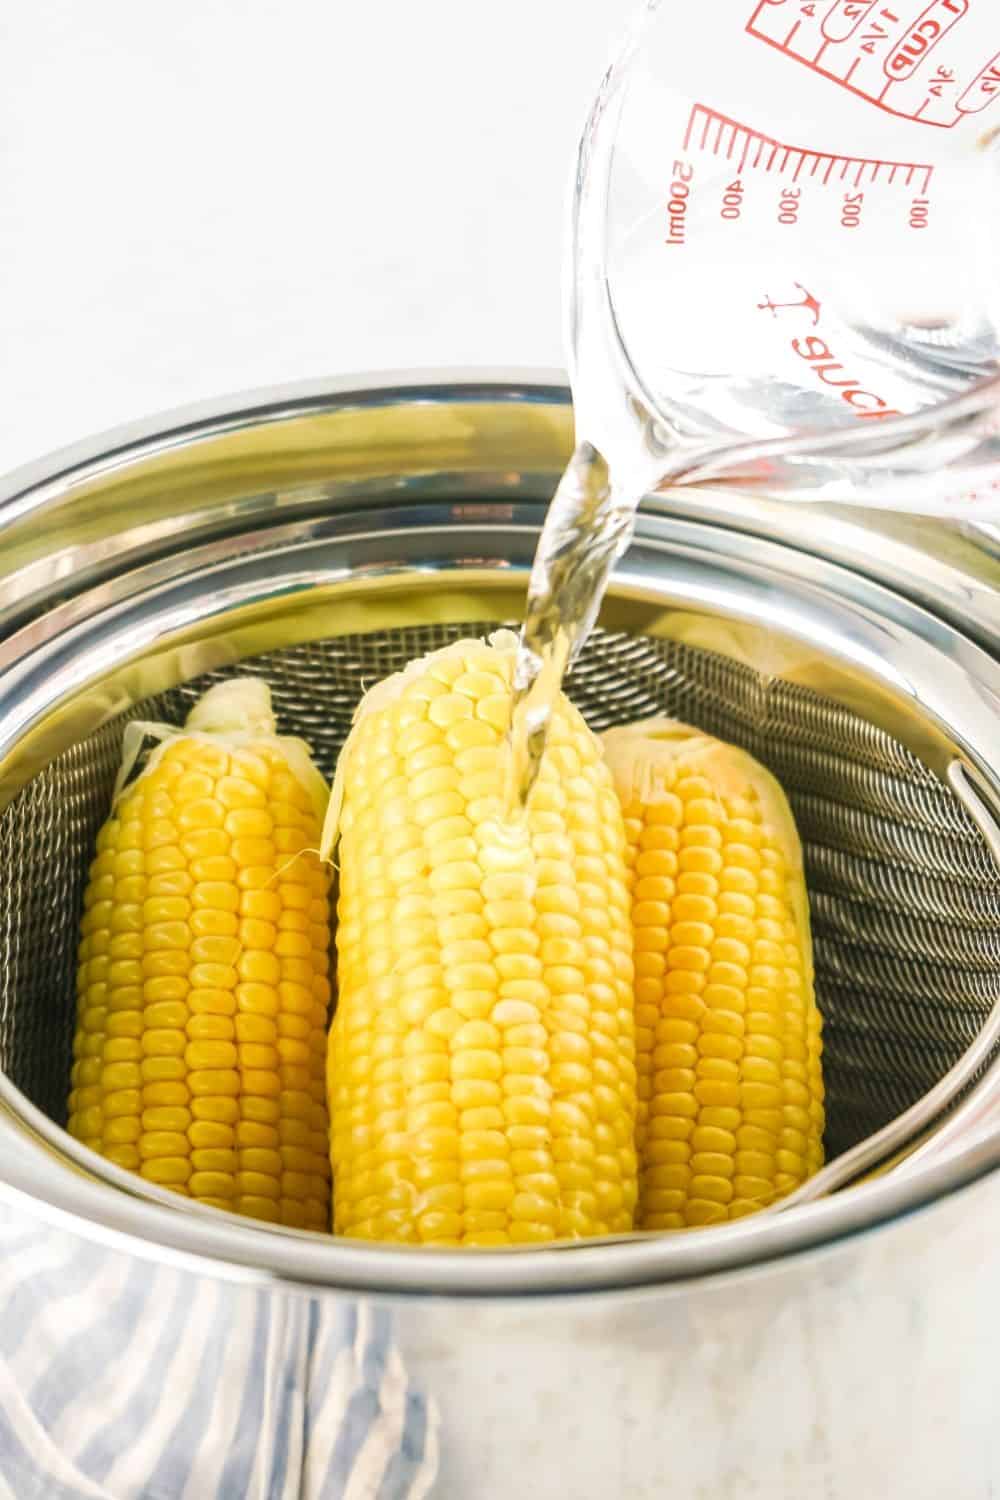 water being poured over fresh corn on the cob in a steamer basket of the Instant Pot